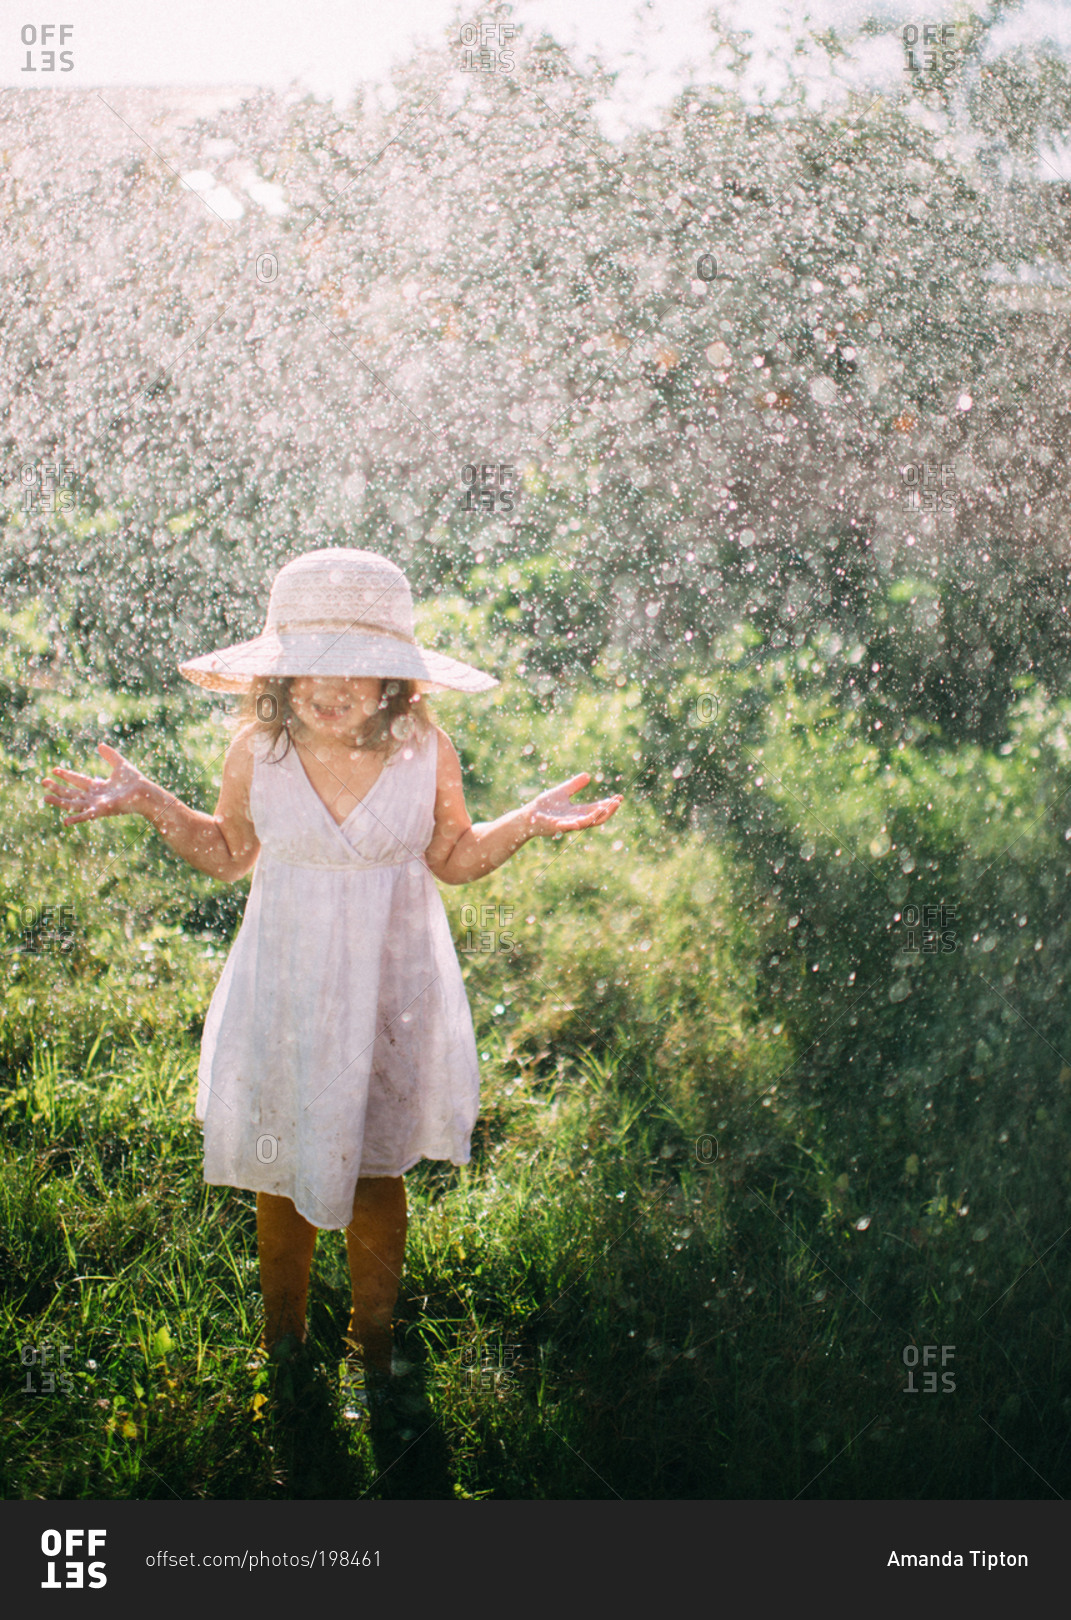 Water raining over girl in white hat and dress